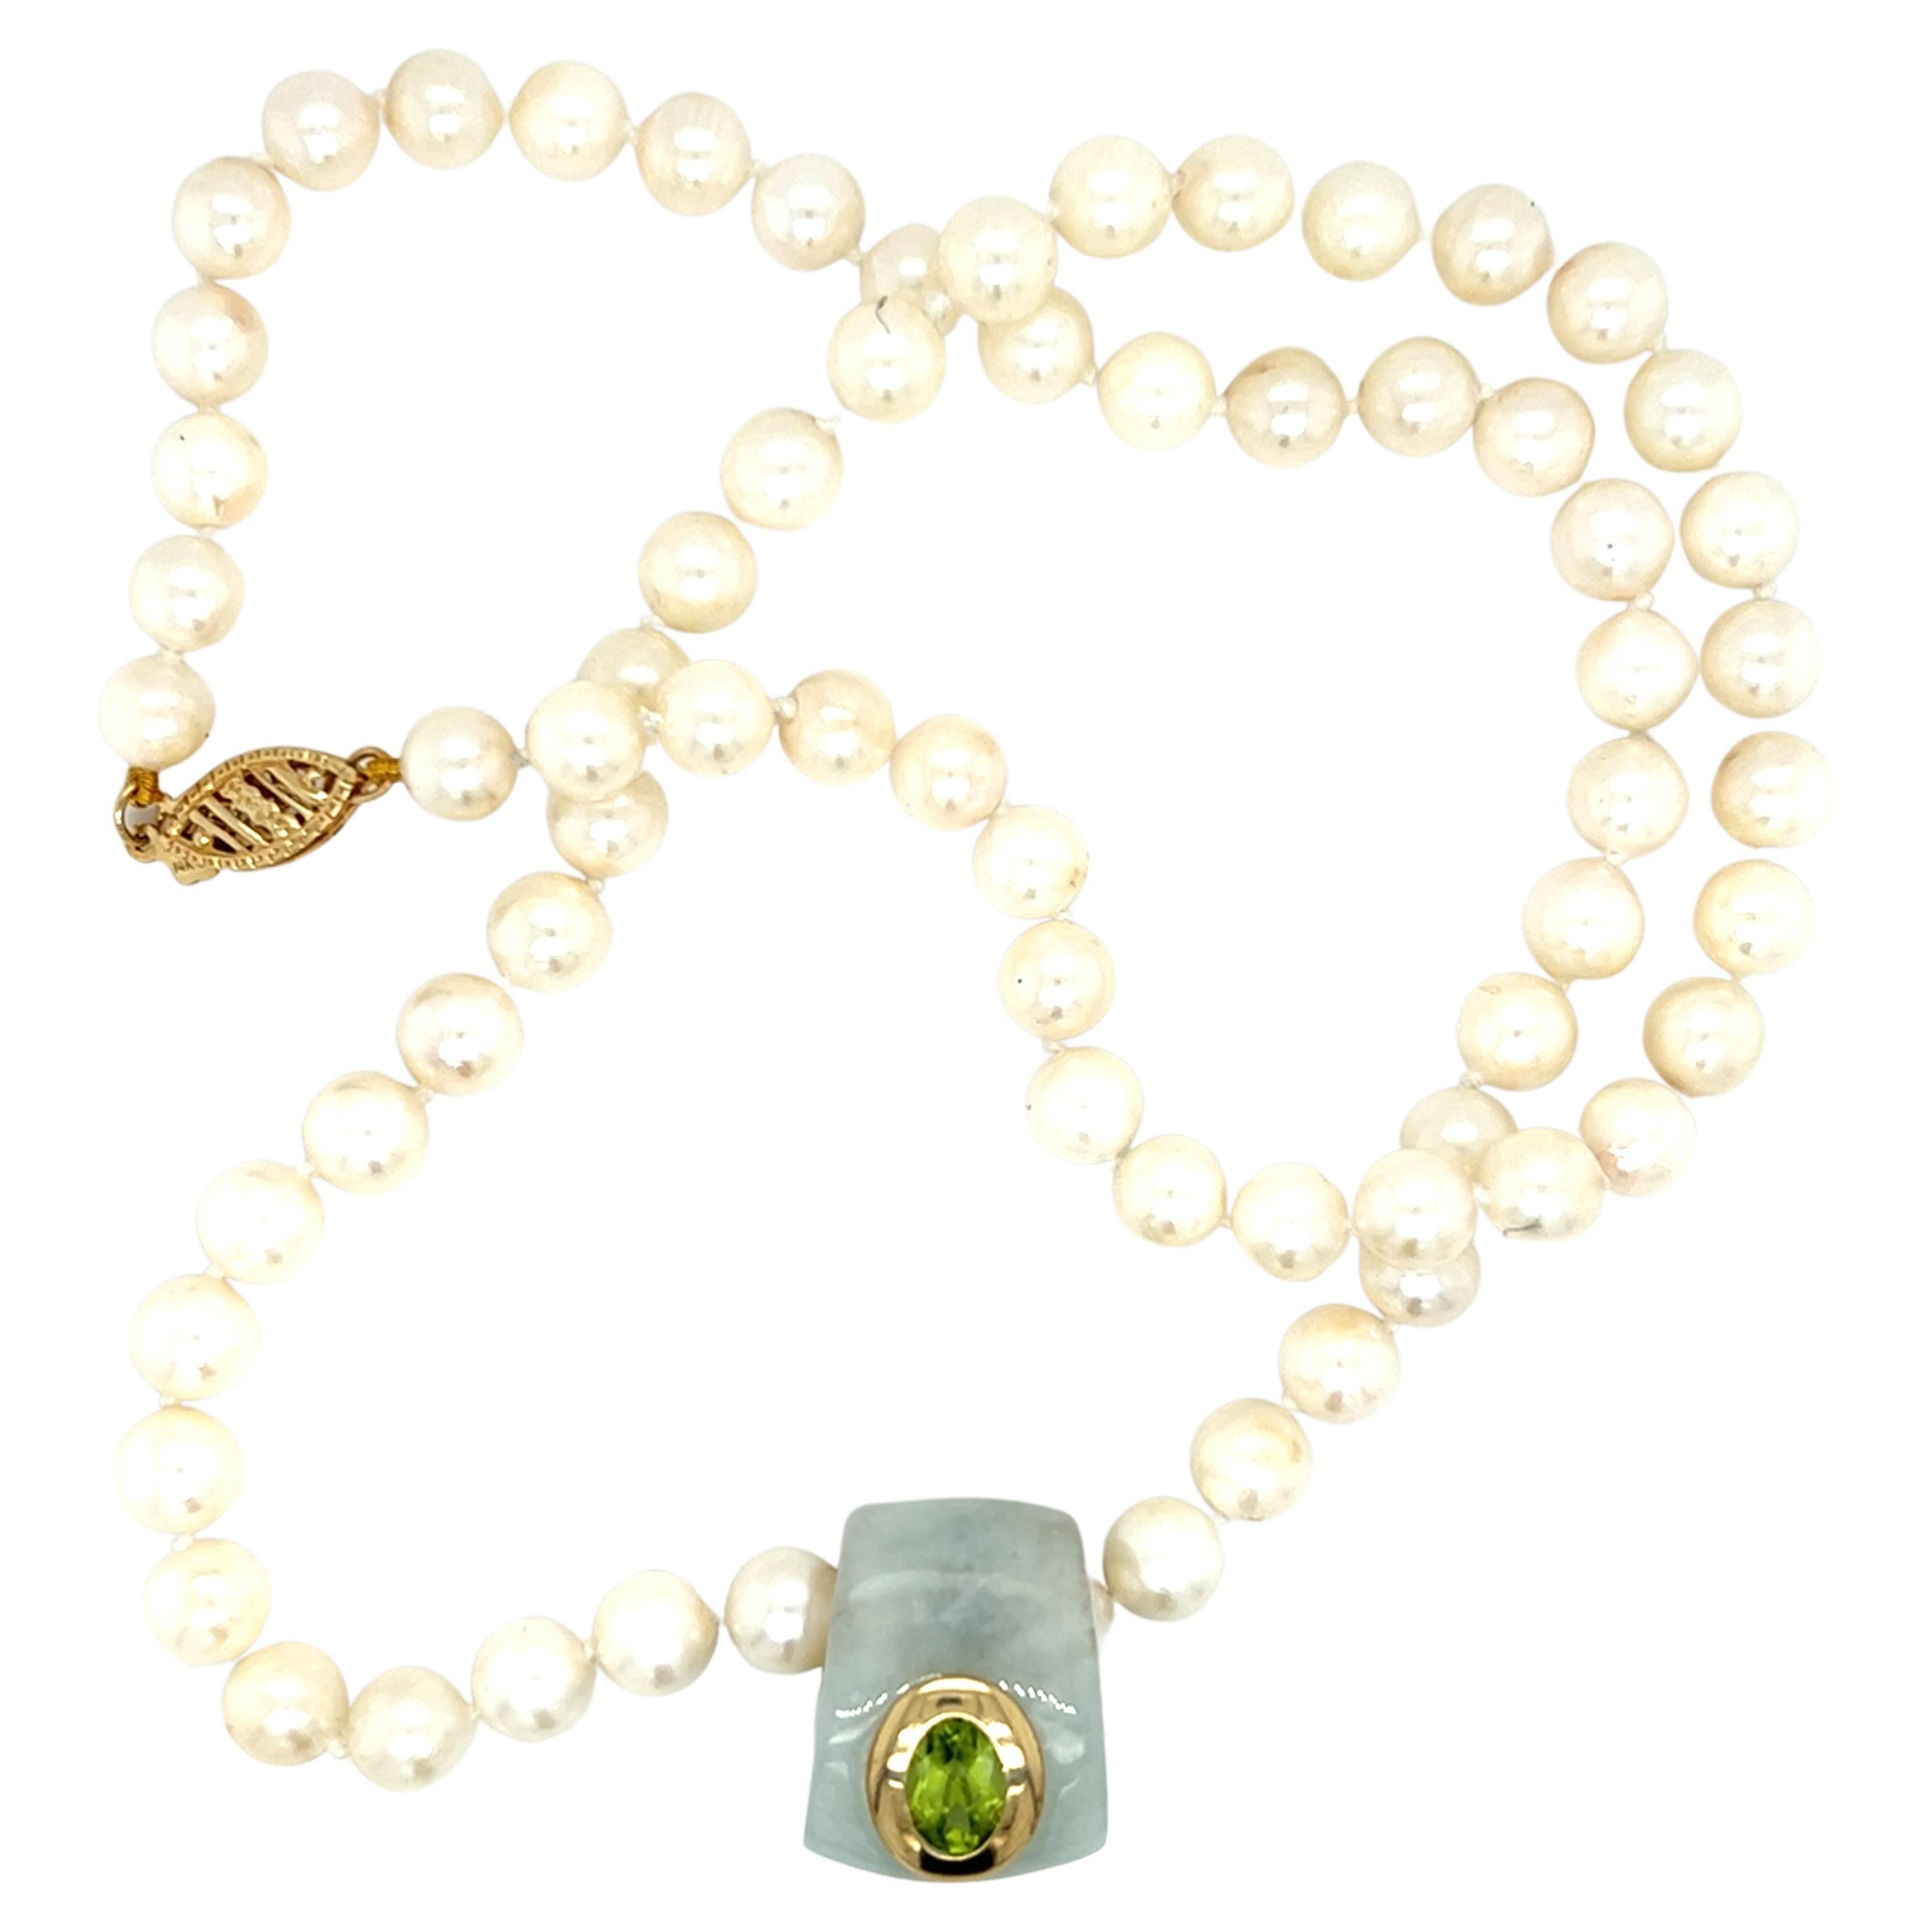 One freshwater pearl strand necklace set with 11mm freshwater pearls and one 19.2x22.68mm jade slide pendant, set with one oval peridot stone, measuring 11.7x9.7mm, surrounded by a 14 karat yellow gold bezel.  The necklace measures 18.5 inches long